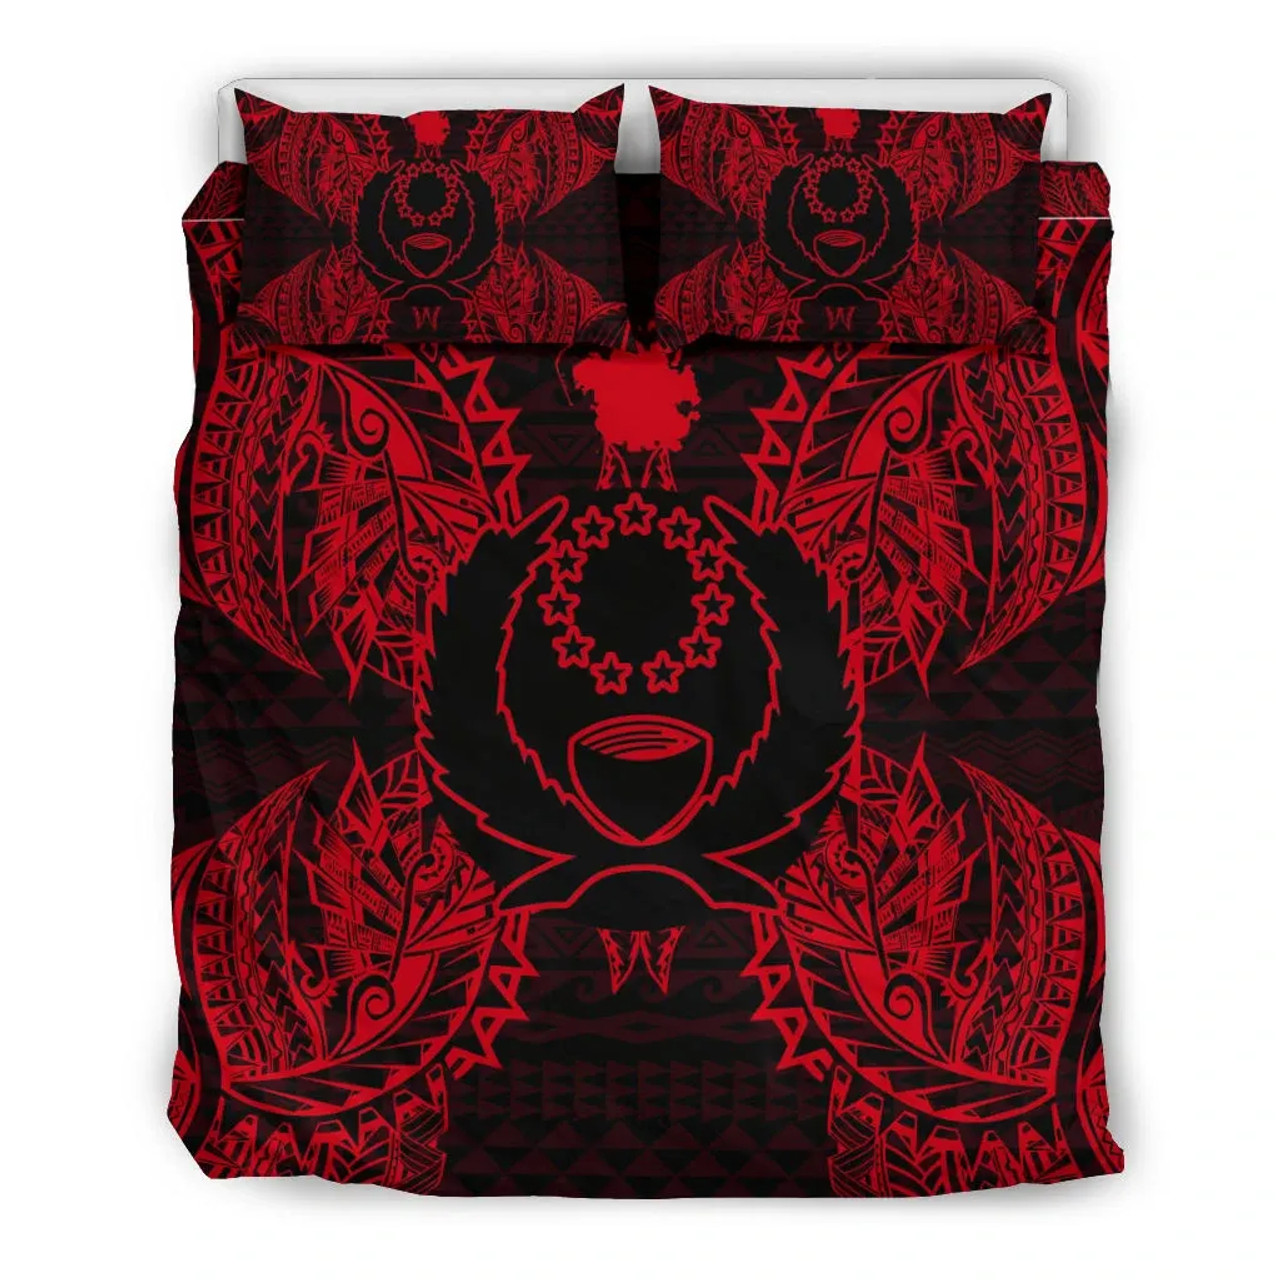 Pohnpei Micronesian Bedding Set - Red Tentacle Turtle 4